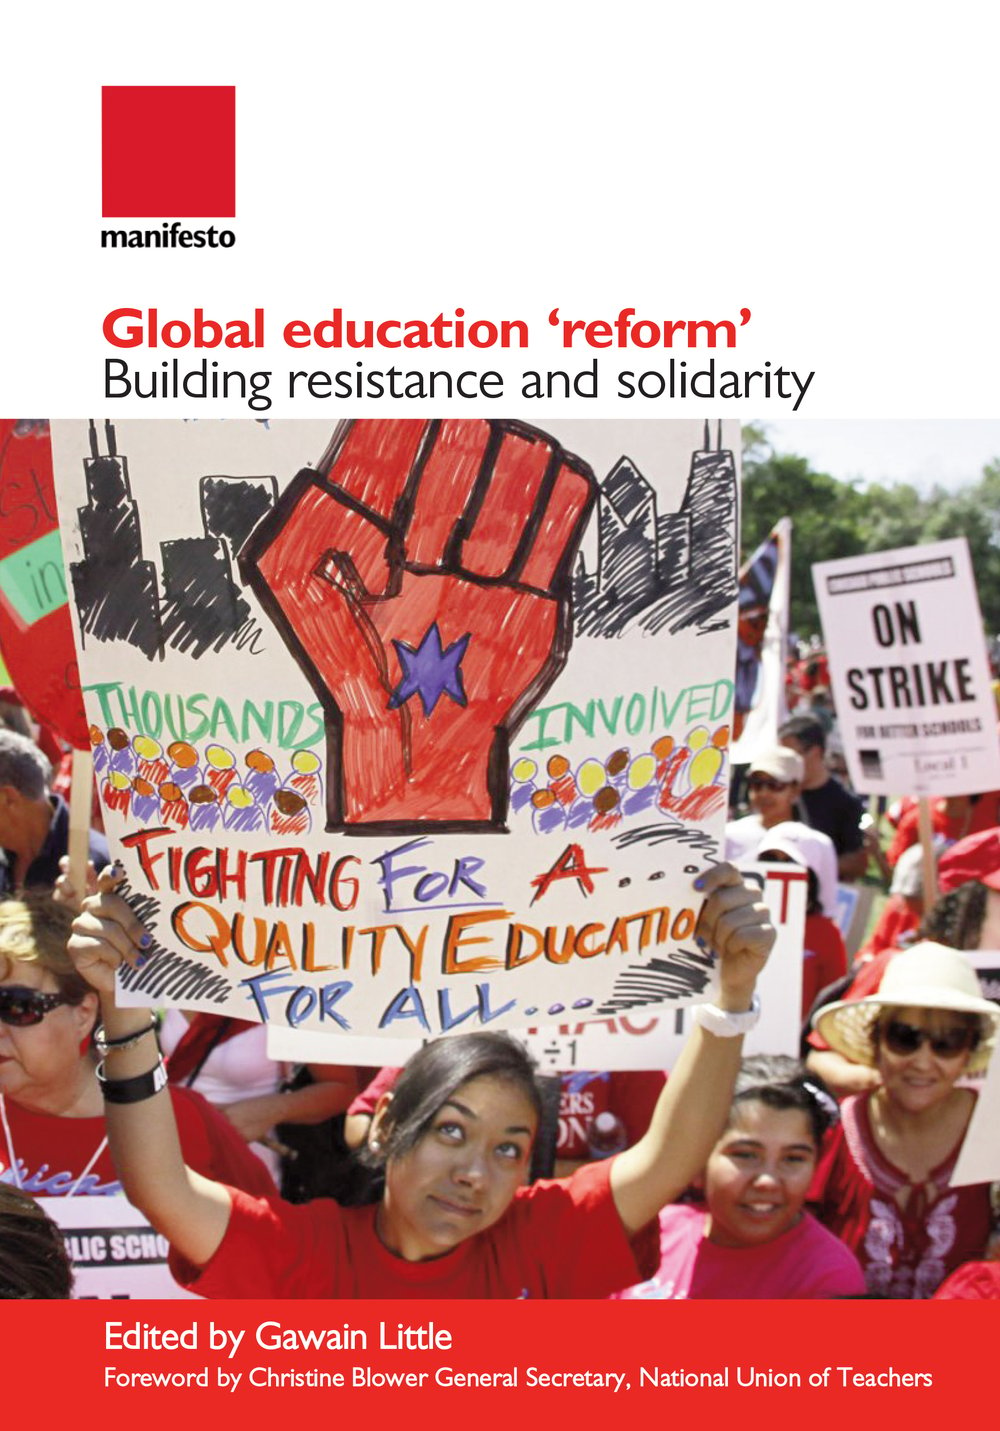 Global Education Reform: Building resistance and solidarity